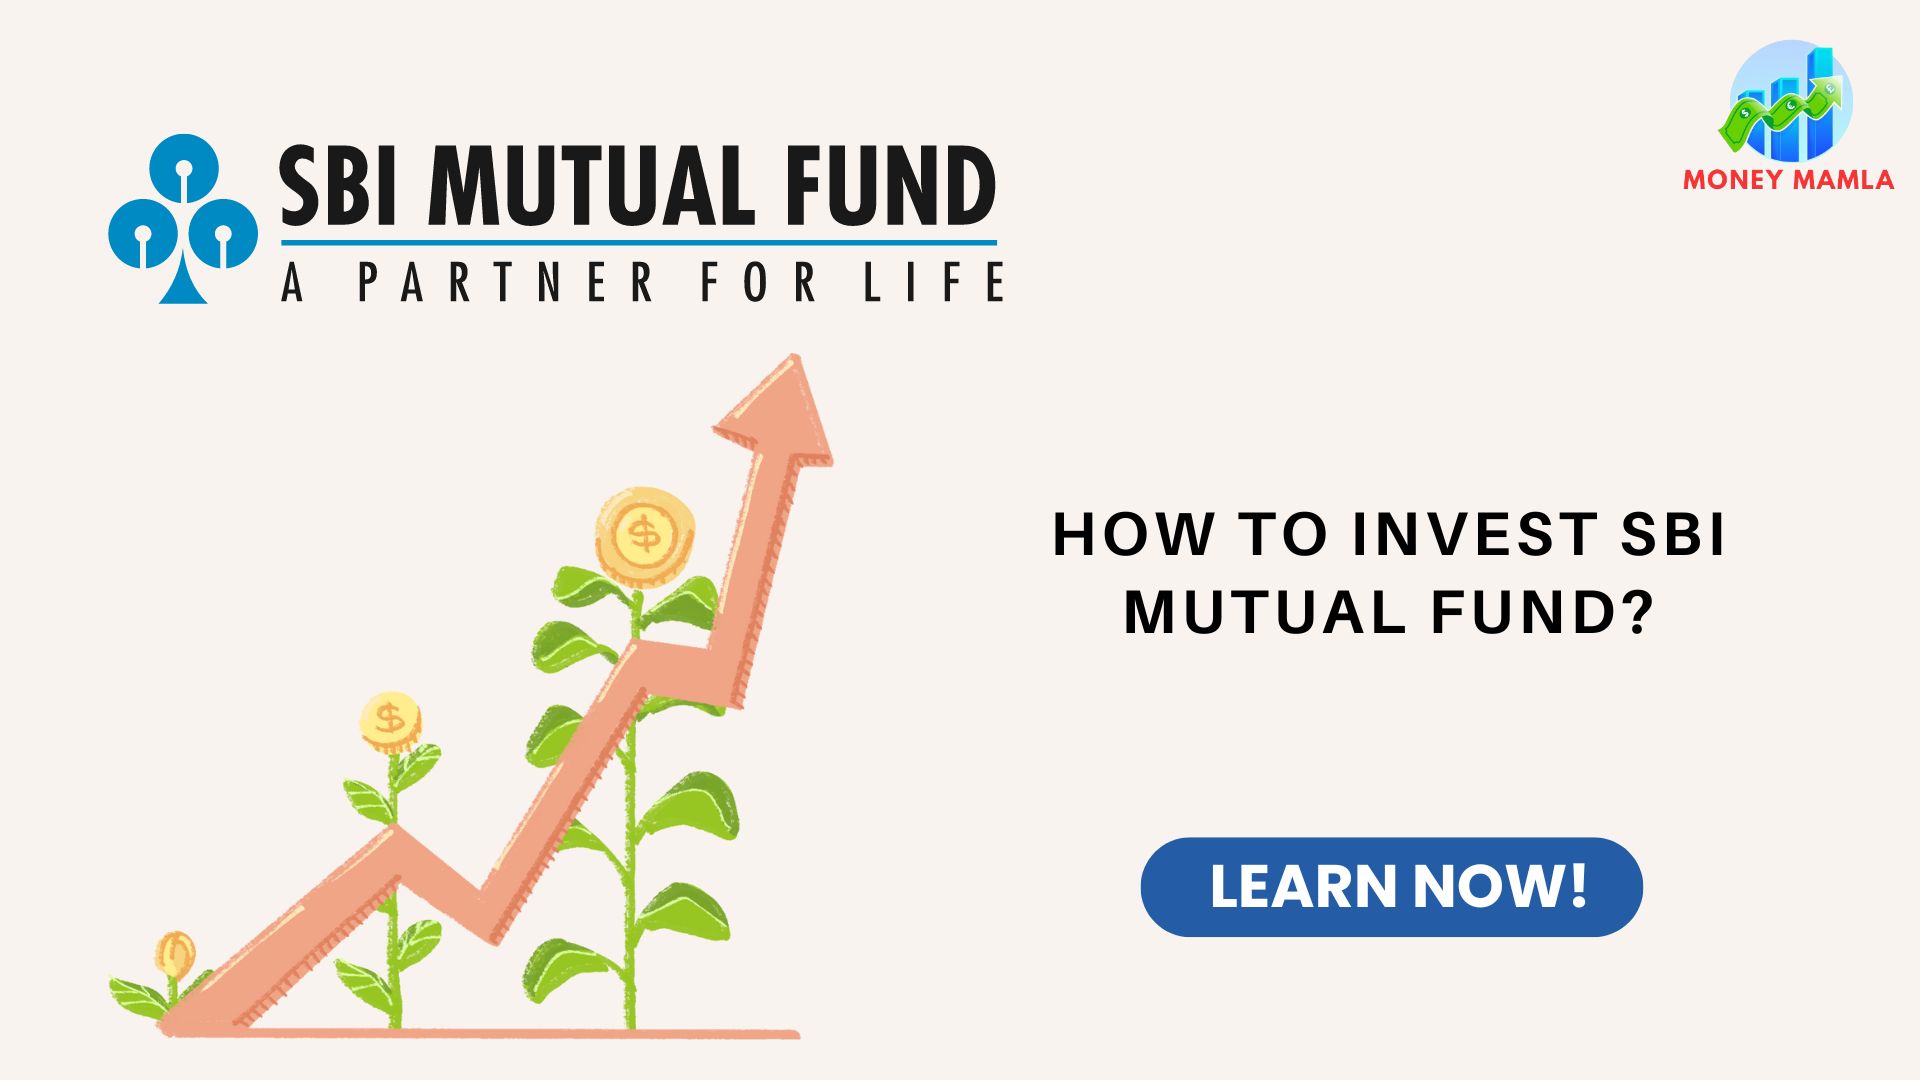 How to invest SBI Mutual Fund?